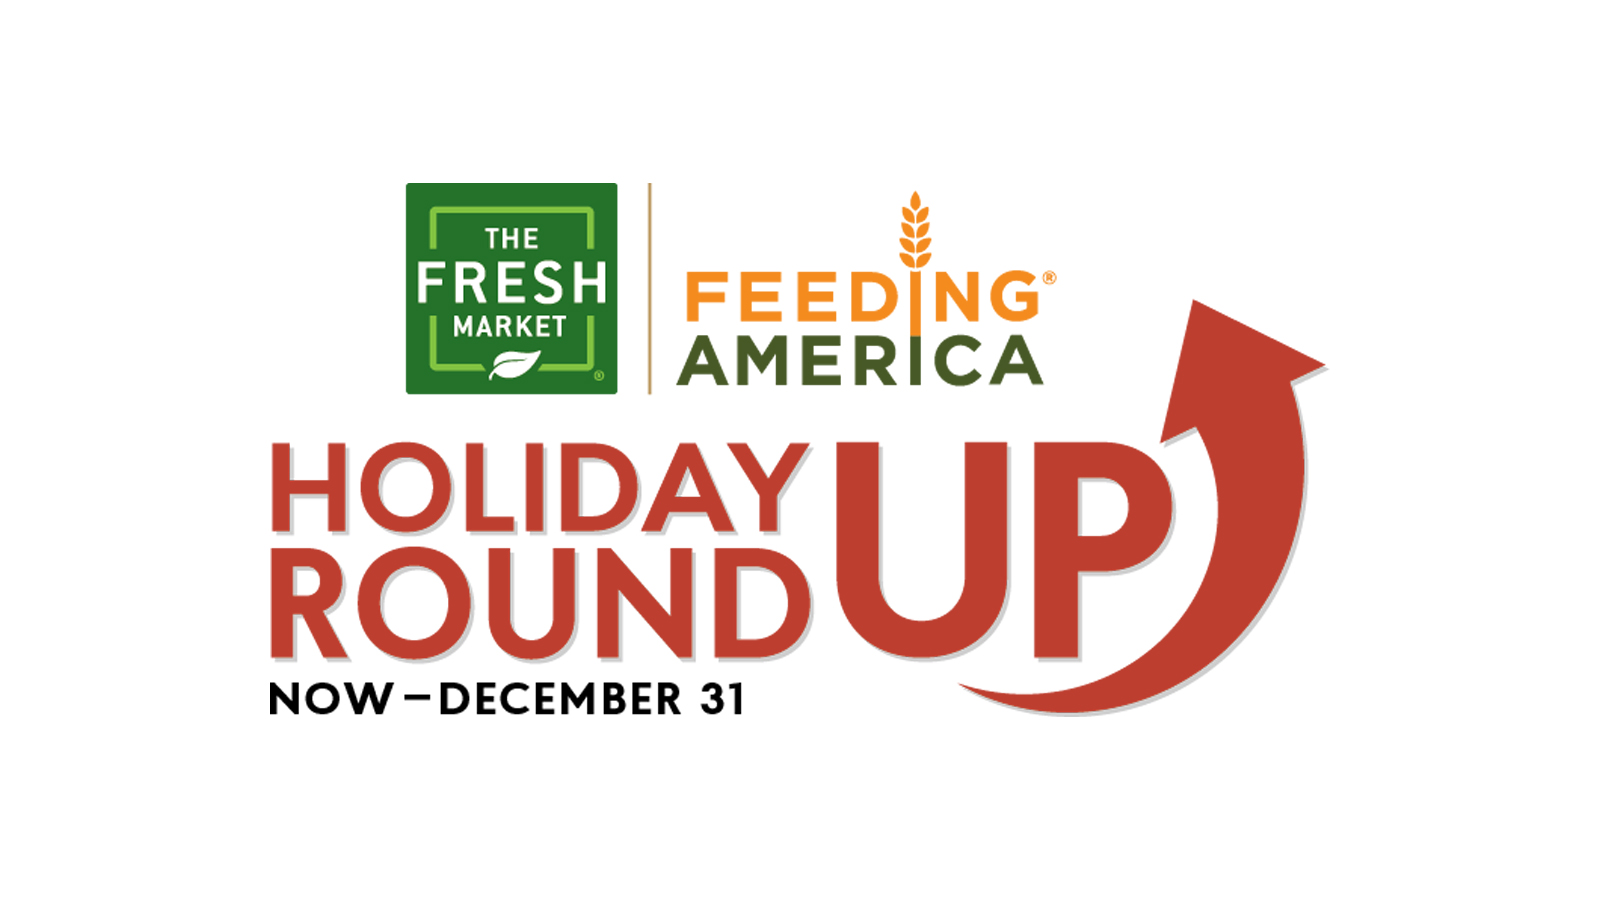 The Fresh Market goes live with new online store